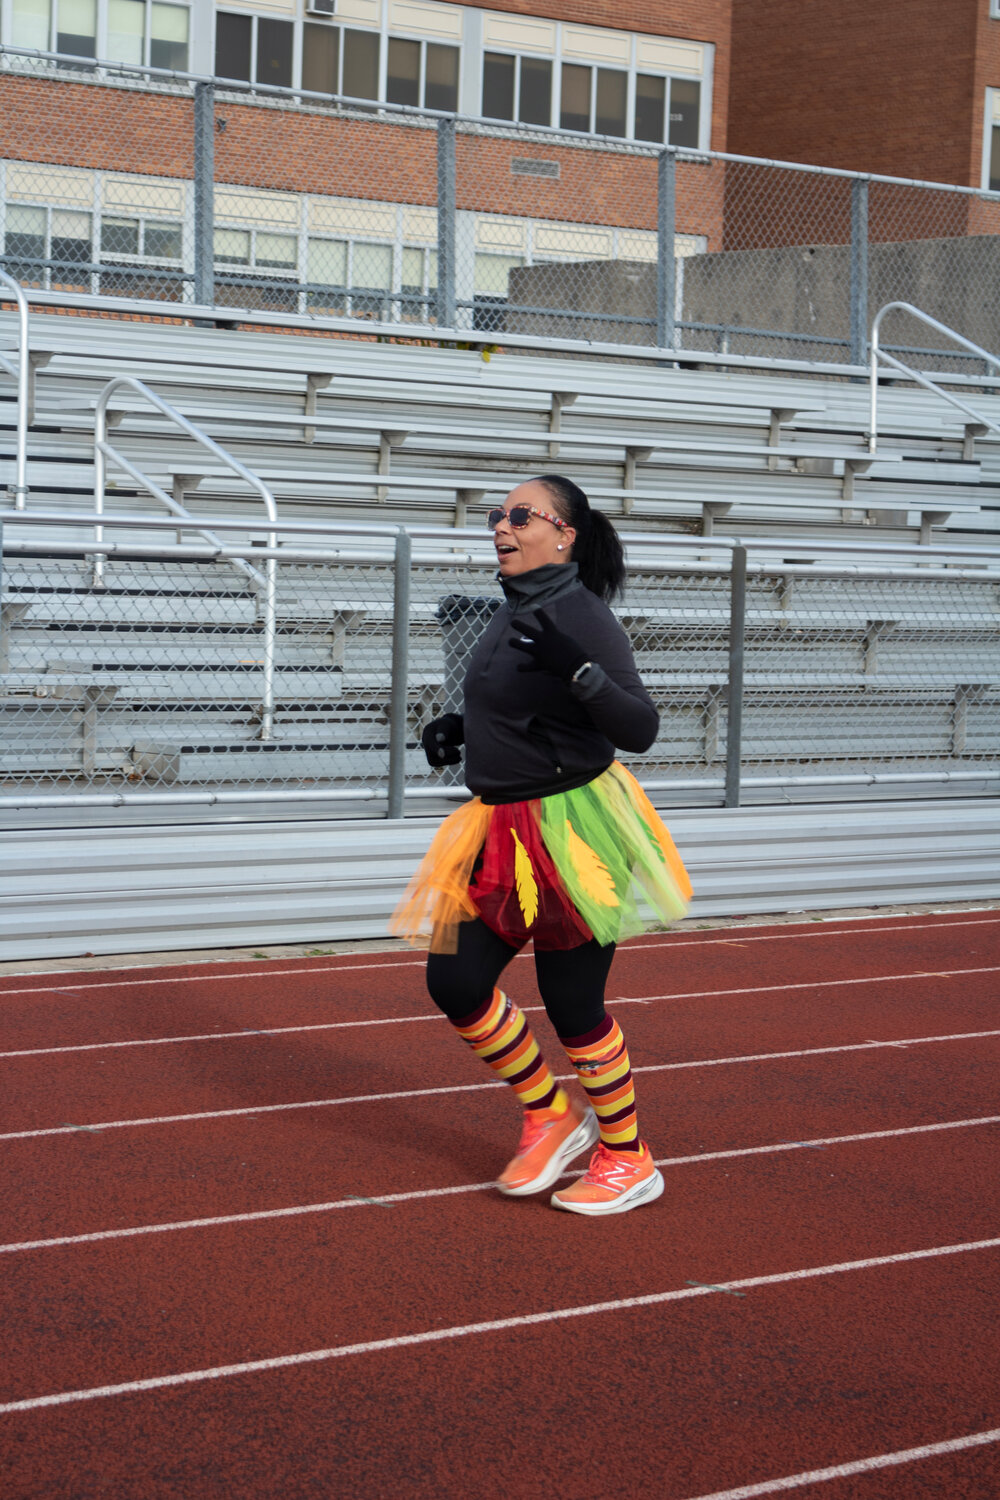 Deborah Prince dressed up in a tutu reminiscent of turkey feathers as she finished her fourth lap at the Elmont Memorial High School track last Sunday.